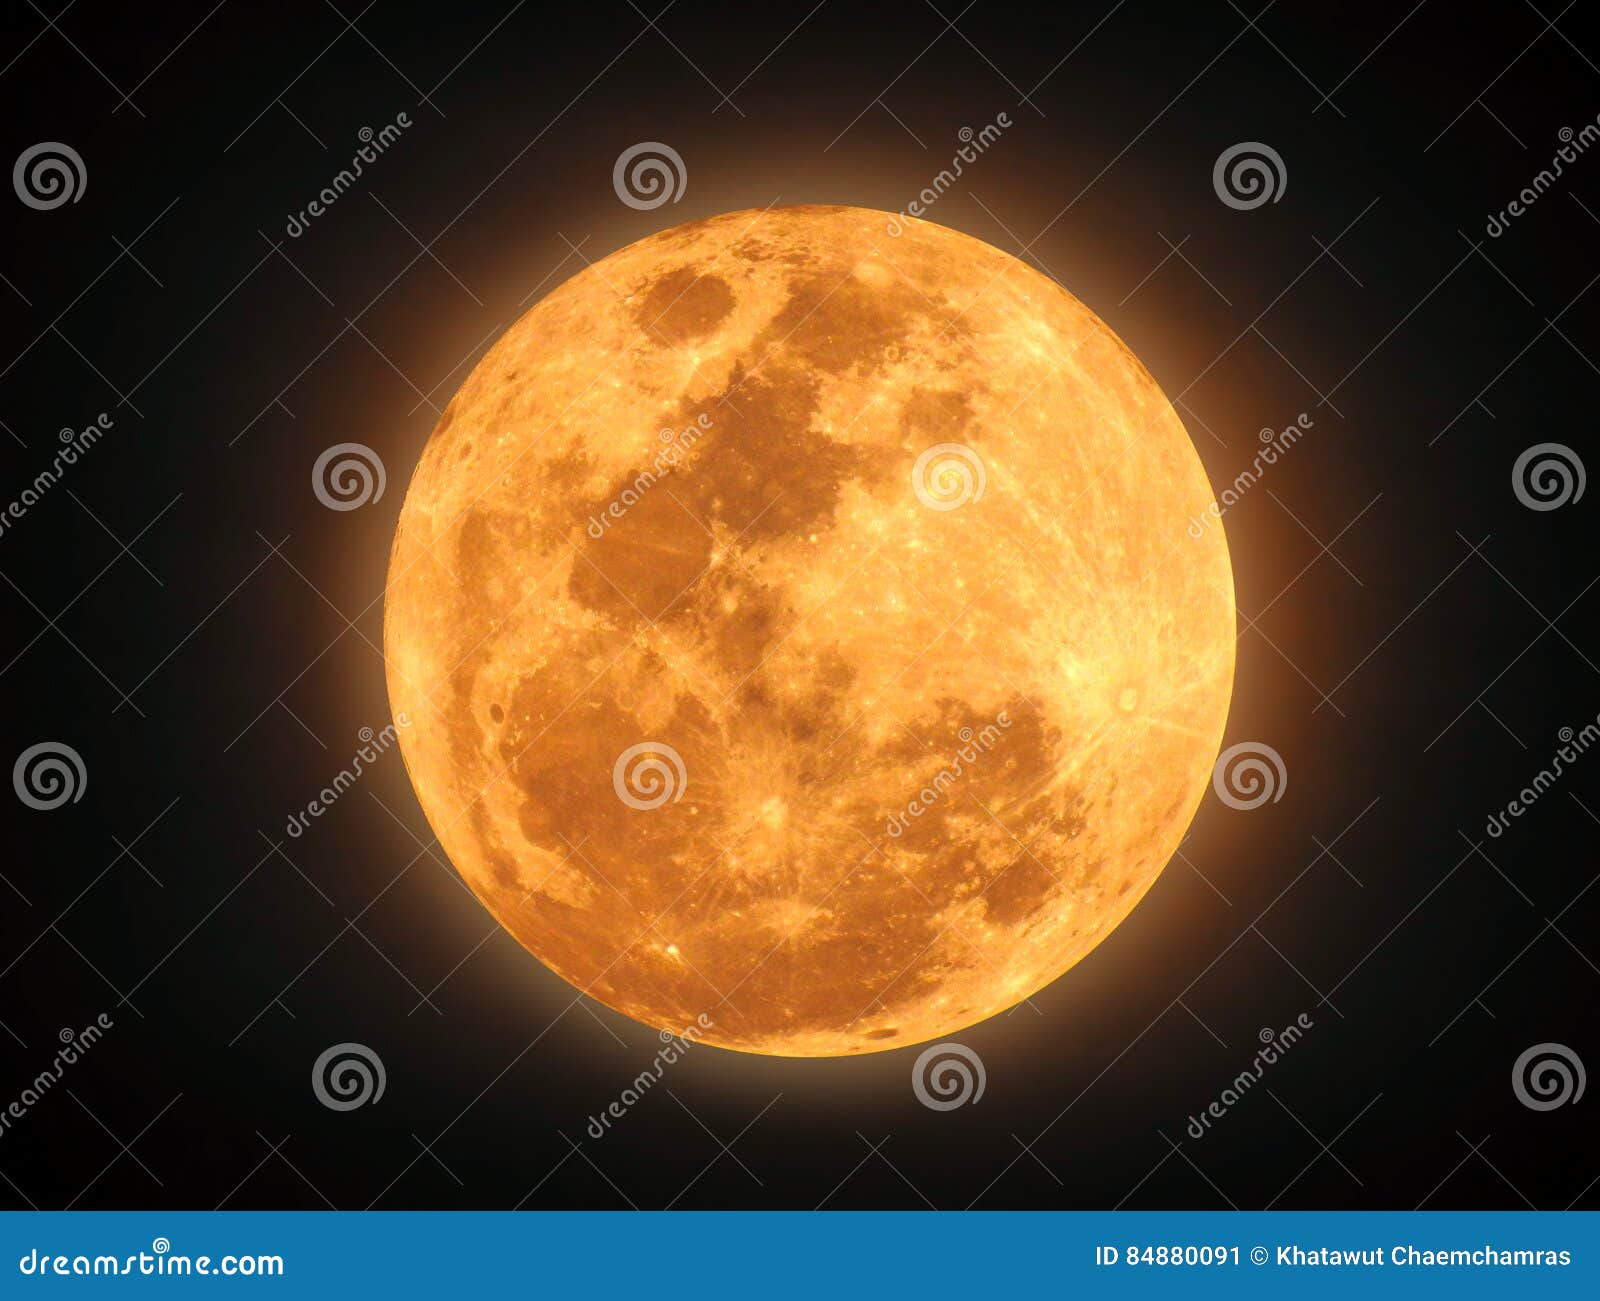 The Yellow Full Moon on Black Background Stock Image - Image of moon ...